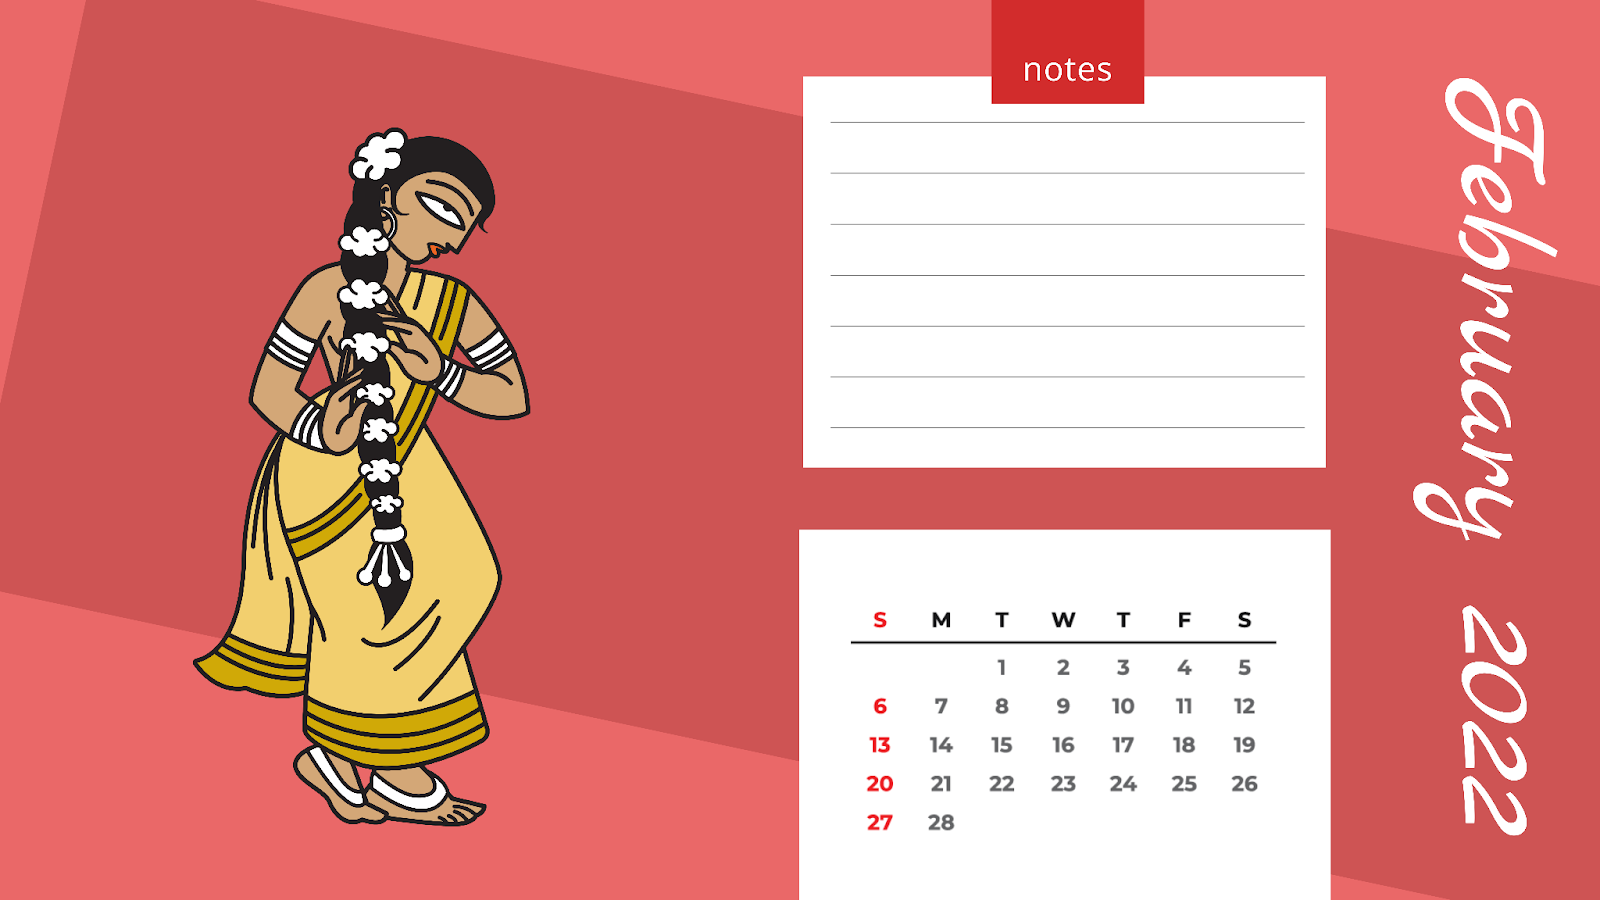 Customized Calendar February month with DrawHipo's Art of Bengal Illustrations  